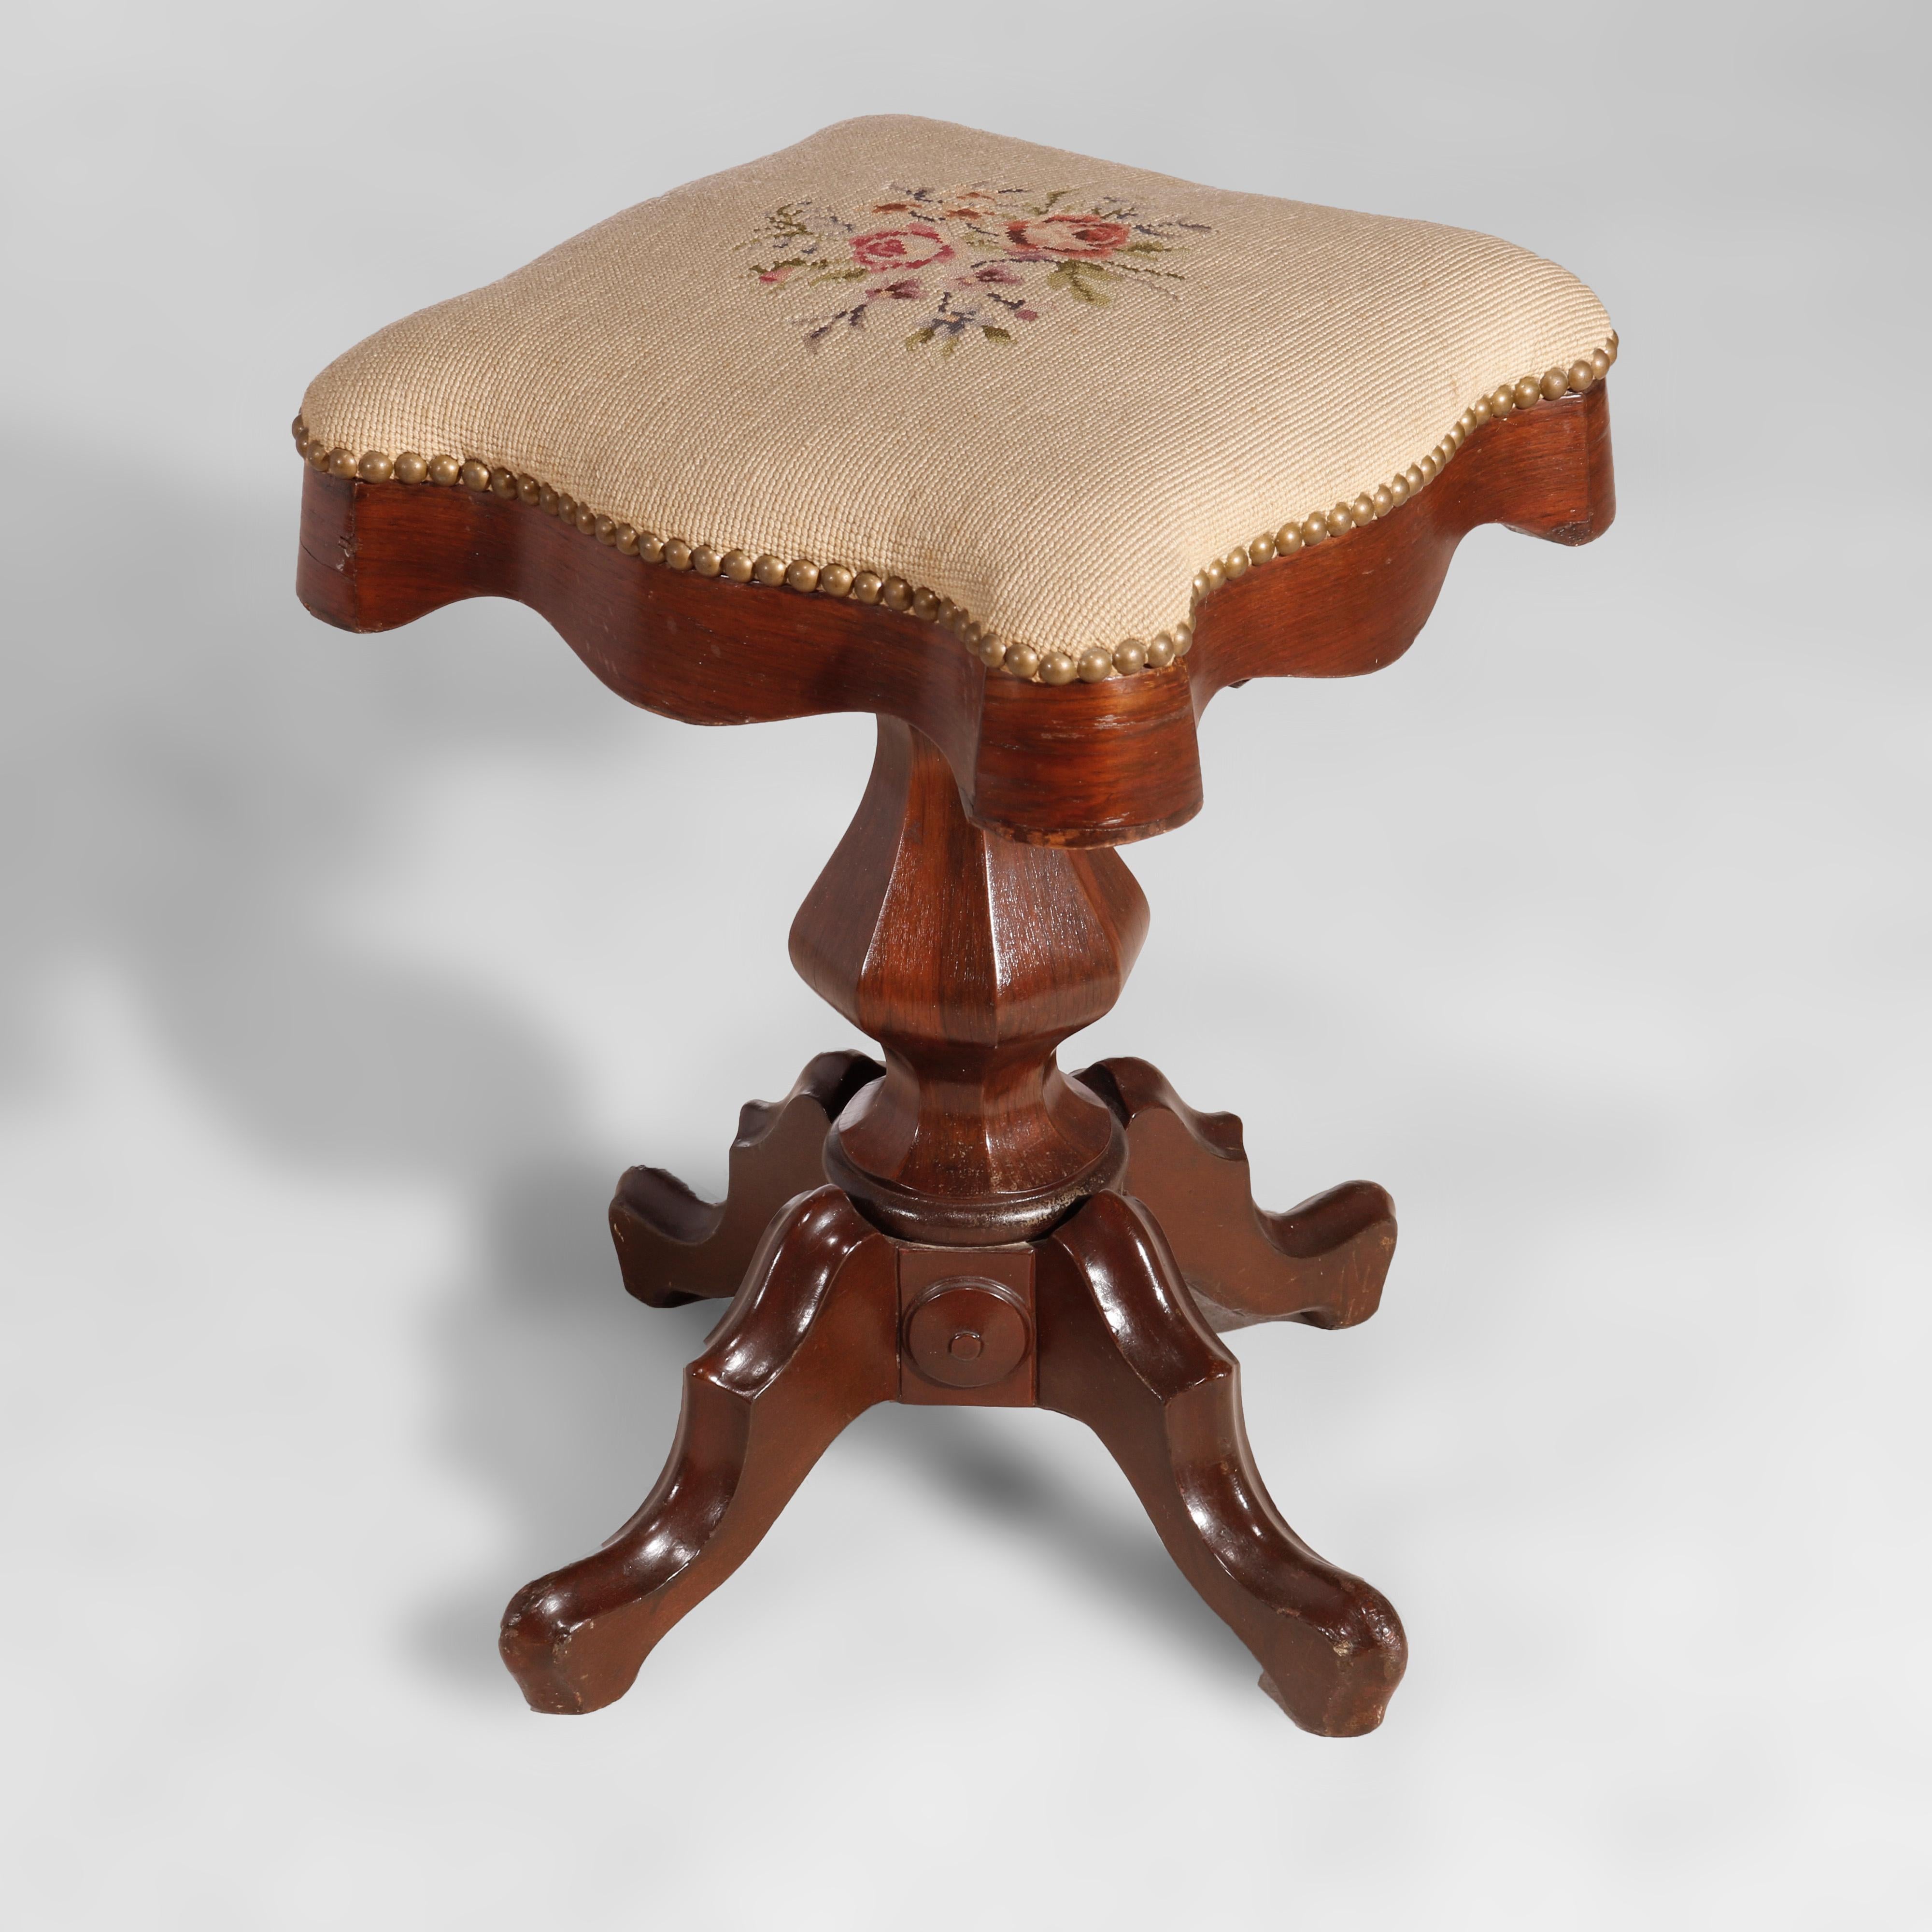 Upholstery Antique Victorian Rosewood Piano Stool, circa 1880